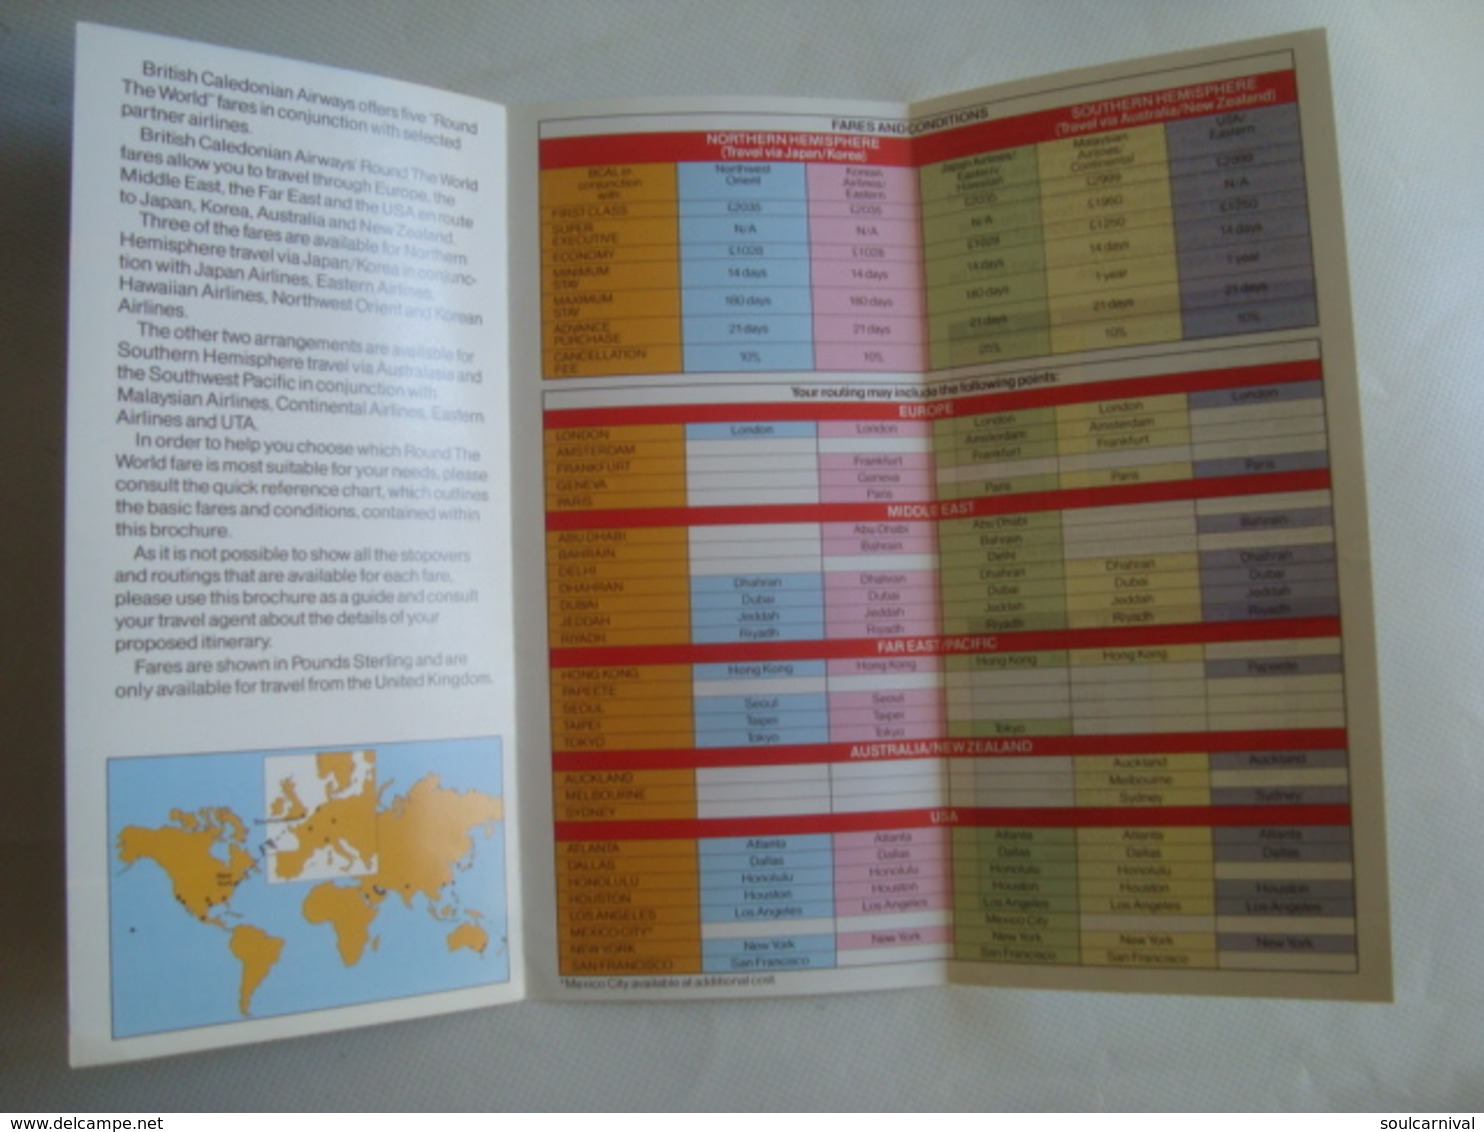 BRITISH CALEDONIAN AIRWAYS. FLY THE WORLD. ROUND THE WORLD FARES - 1986. TRI-FOLD. - Horaires